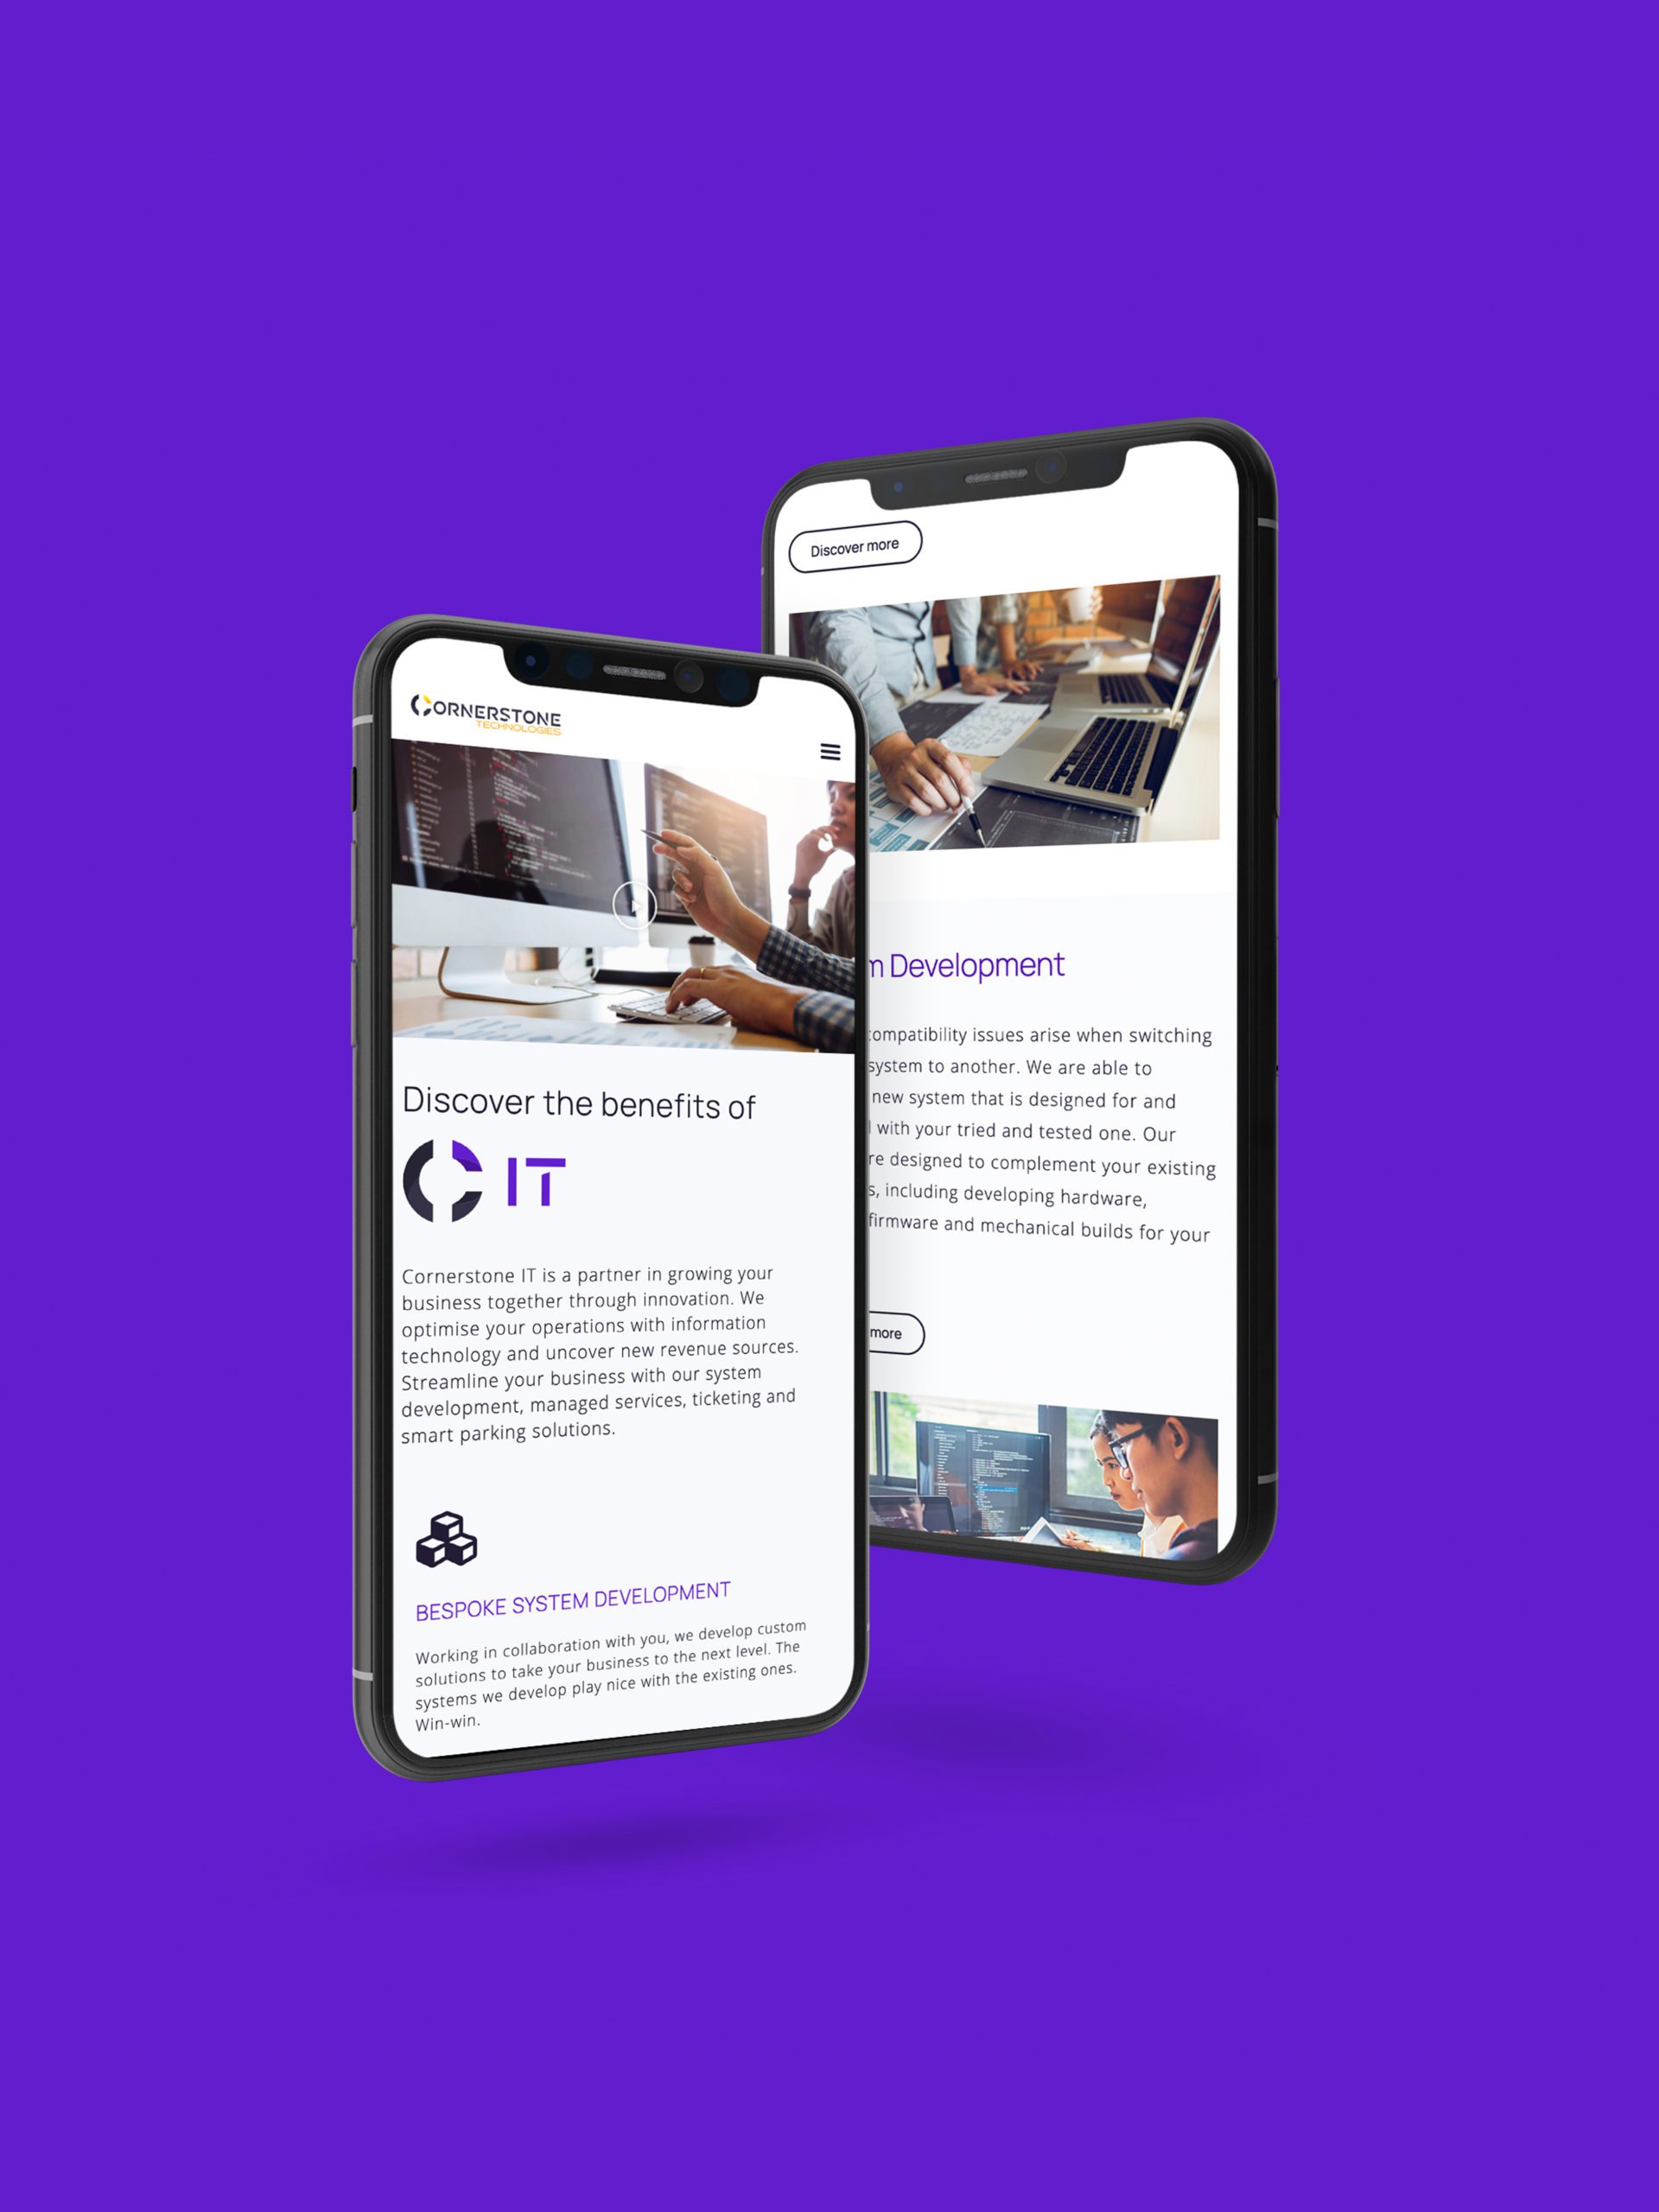 Cornerstone Technologies website on iphone screens with purple background